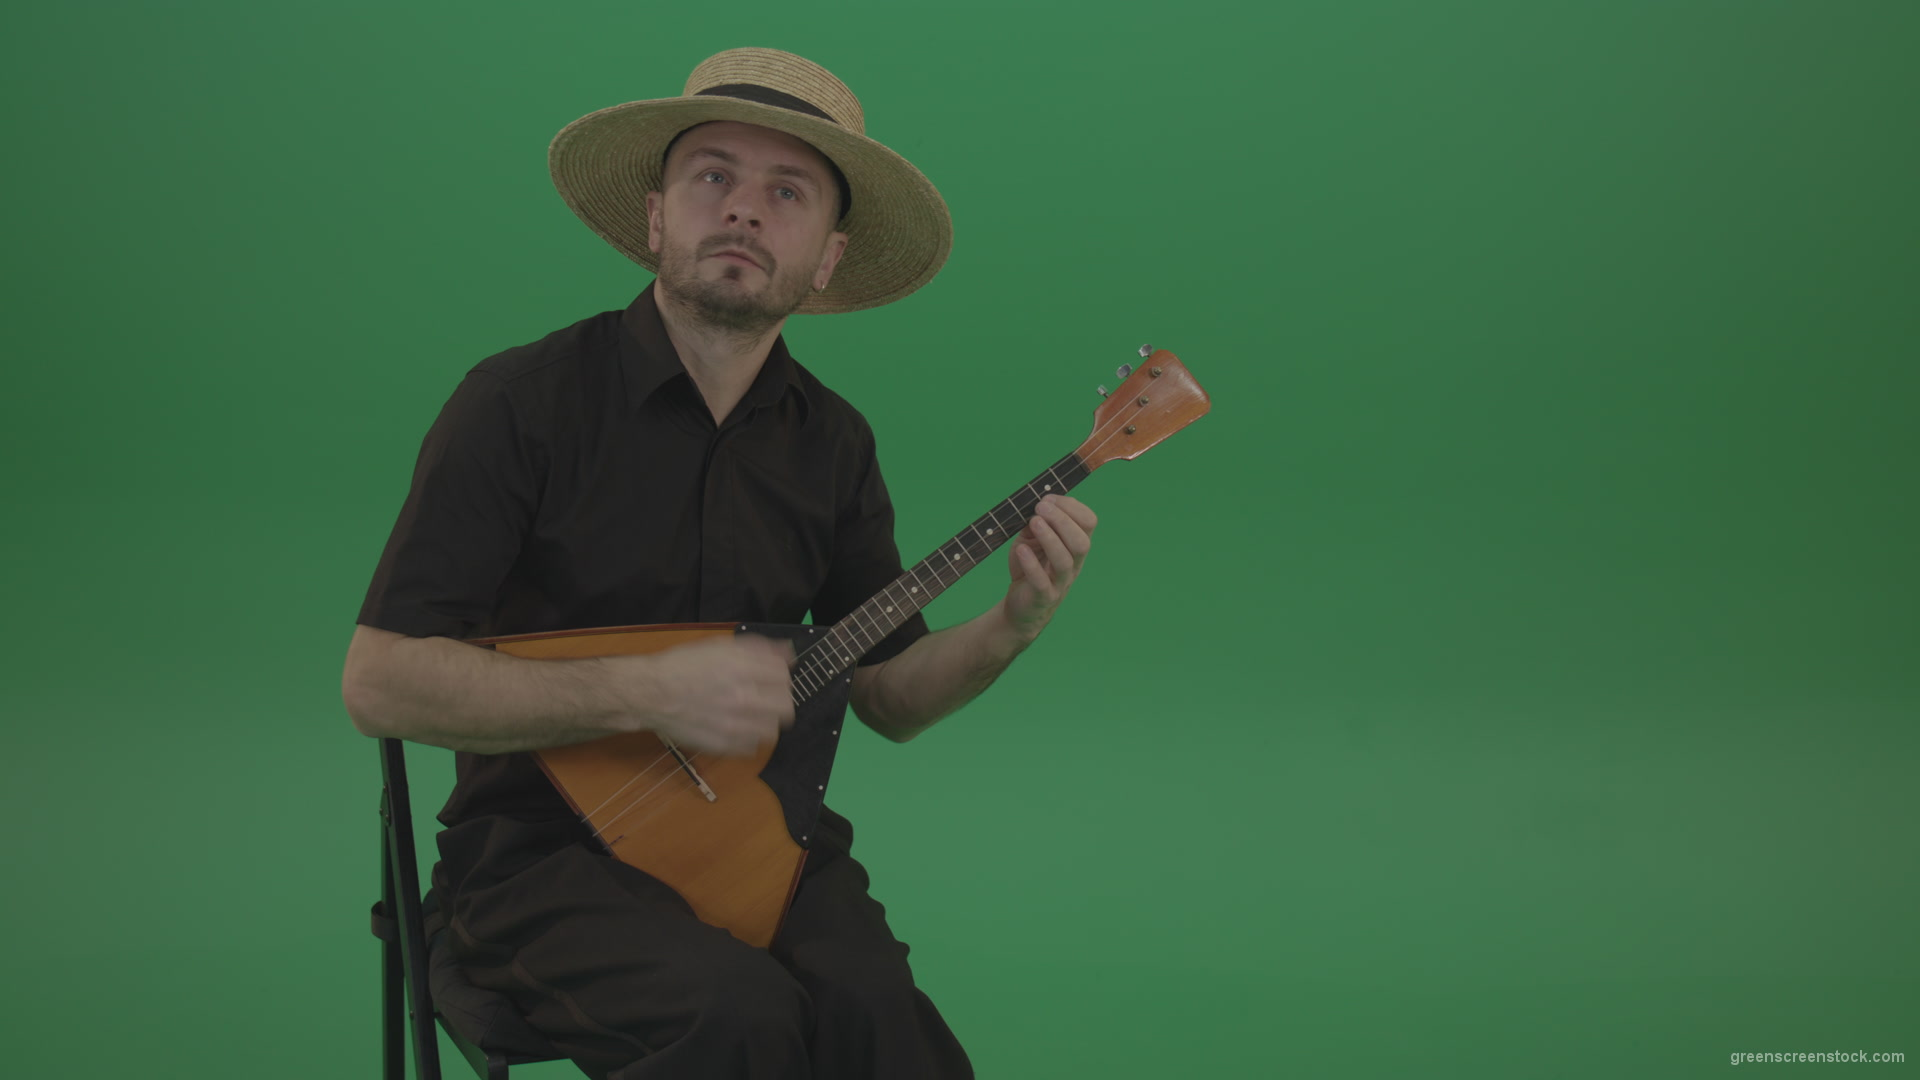 Man-from-village-play-Balalaika-music-instrument-isolated-on-green-screen_008 Green Screen Stock